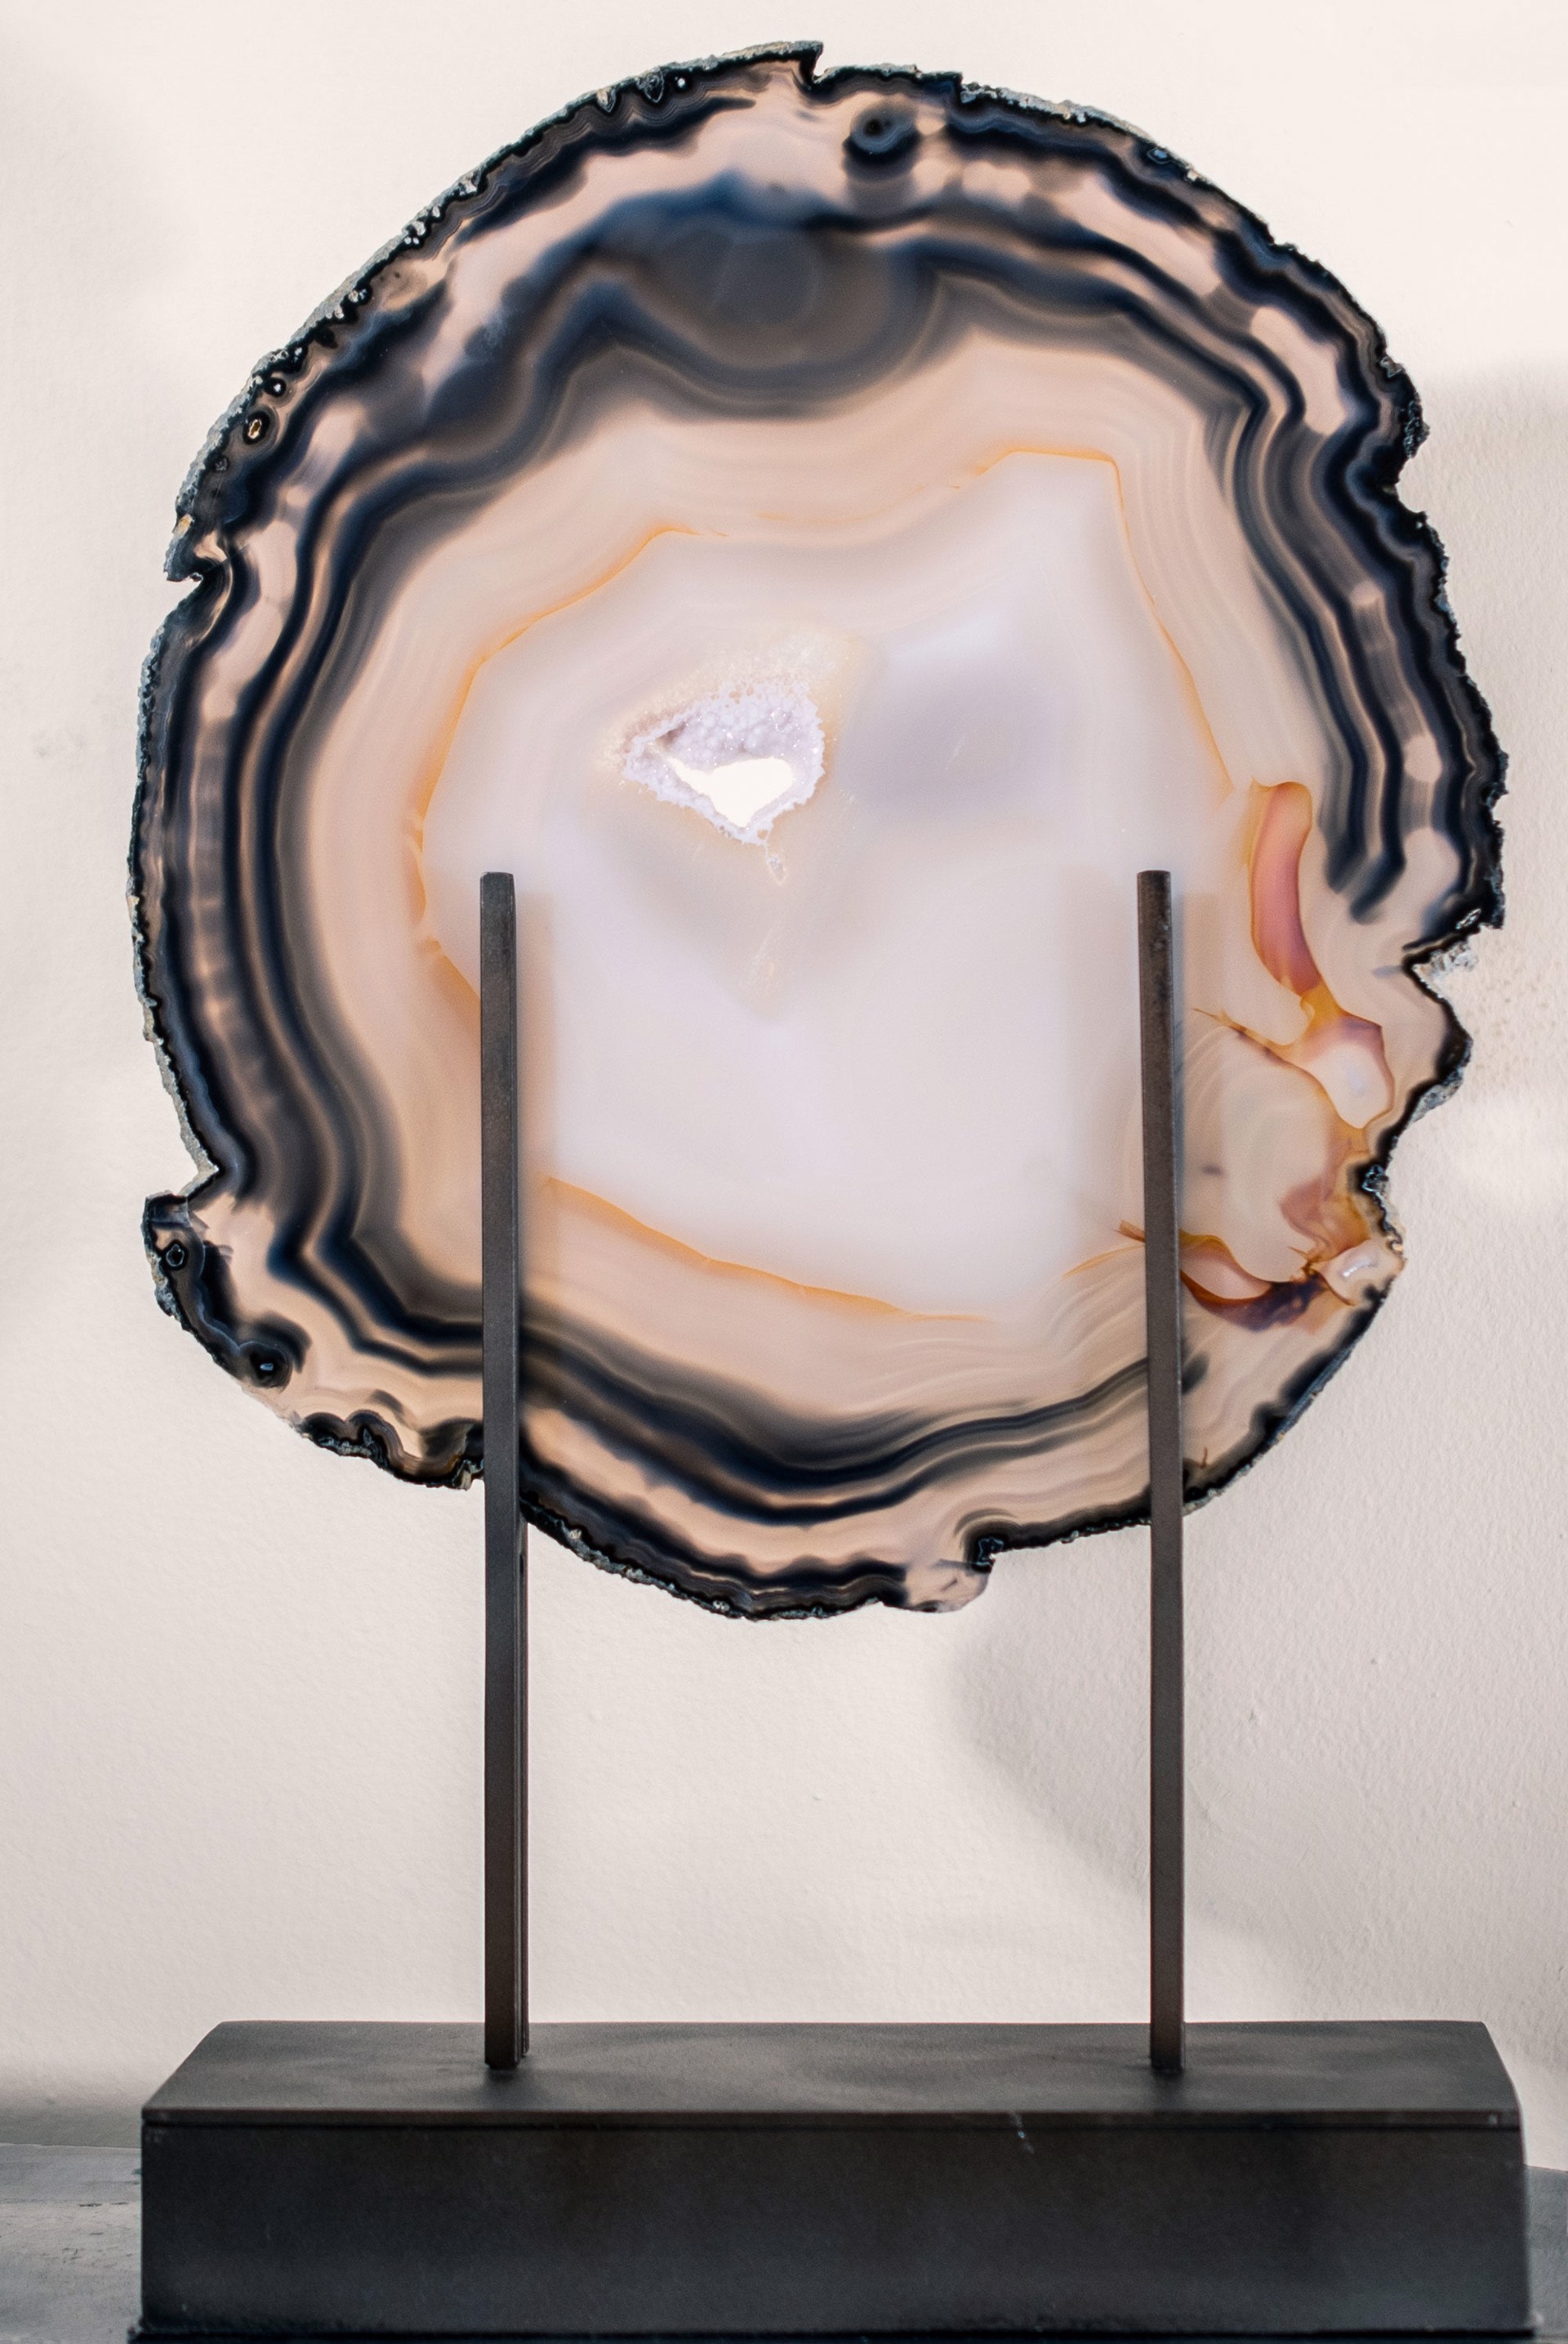 Tabletop Agate on Stand by Jim Vilona